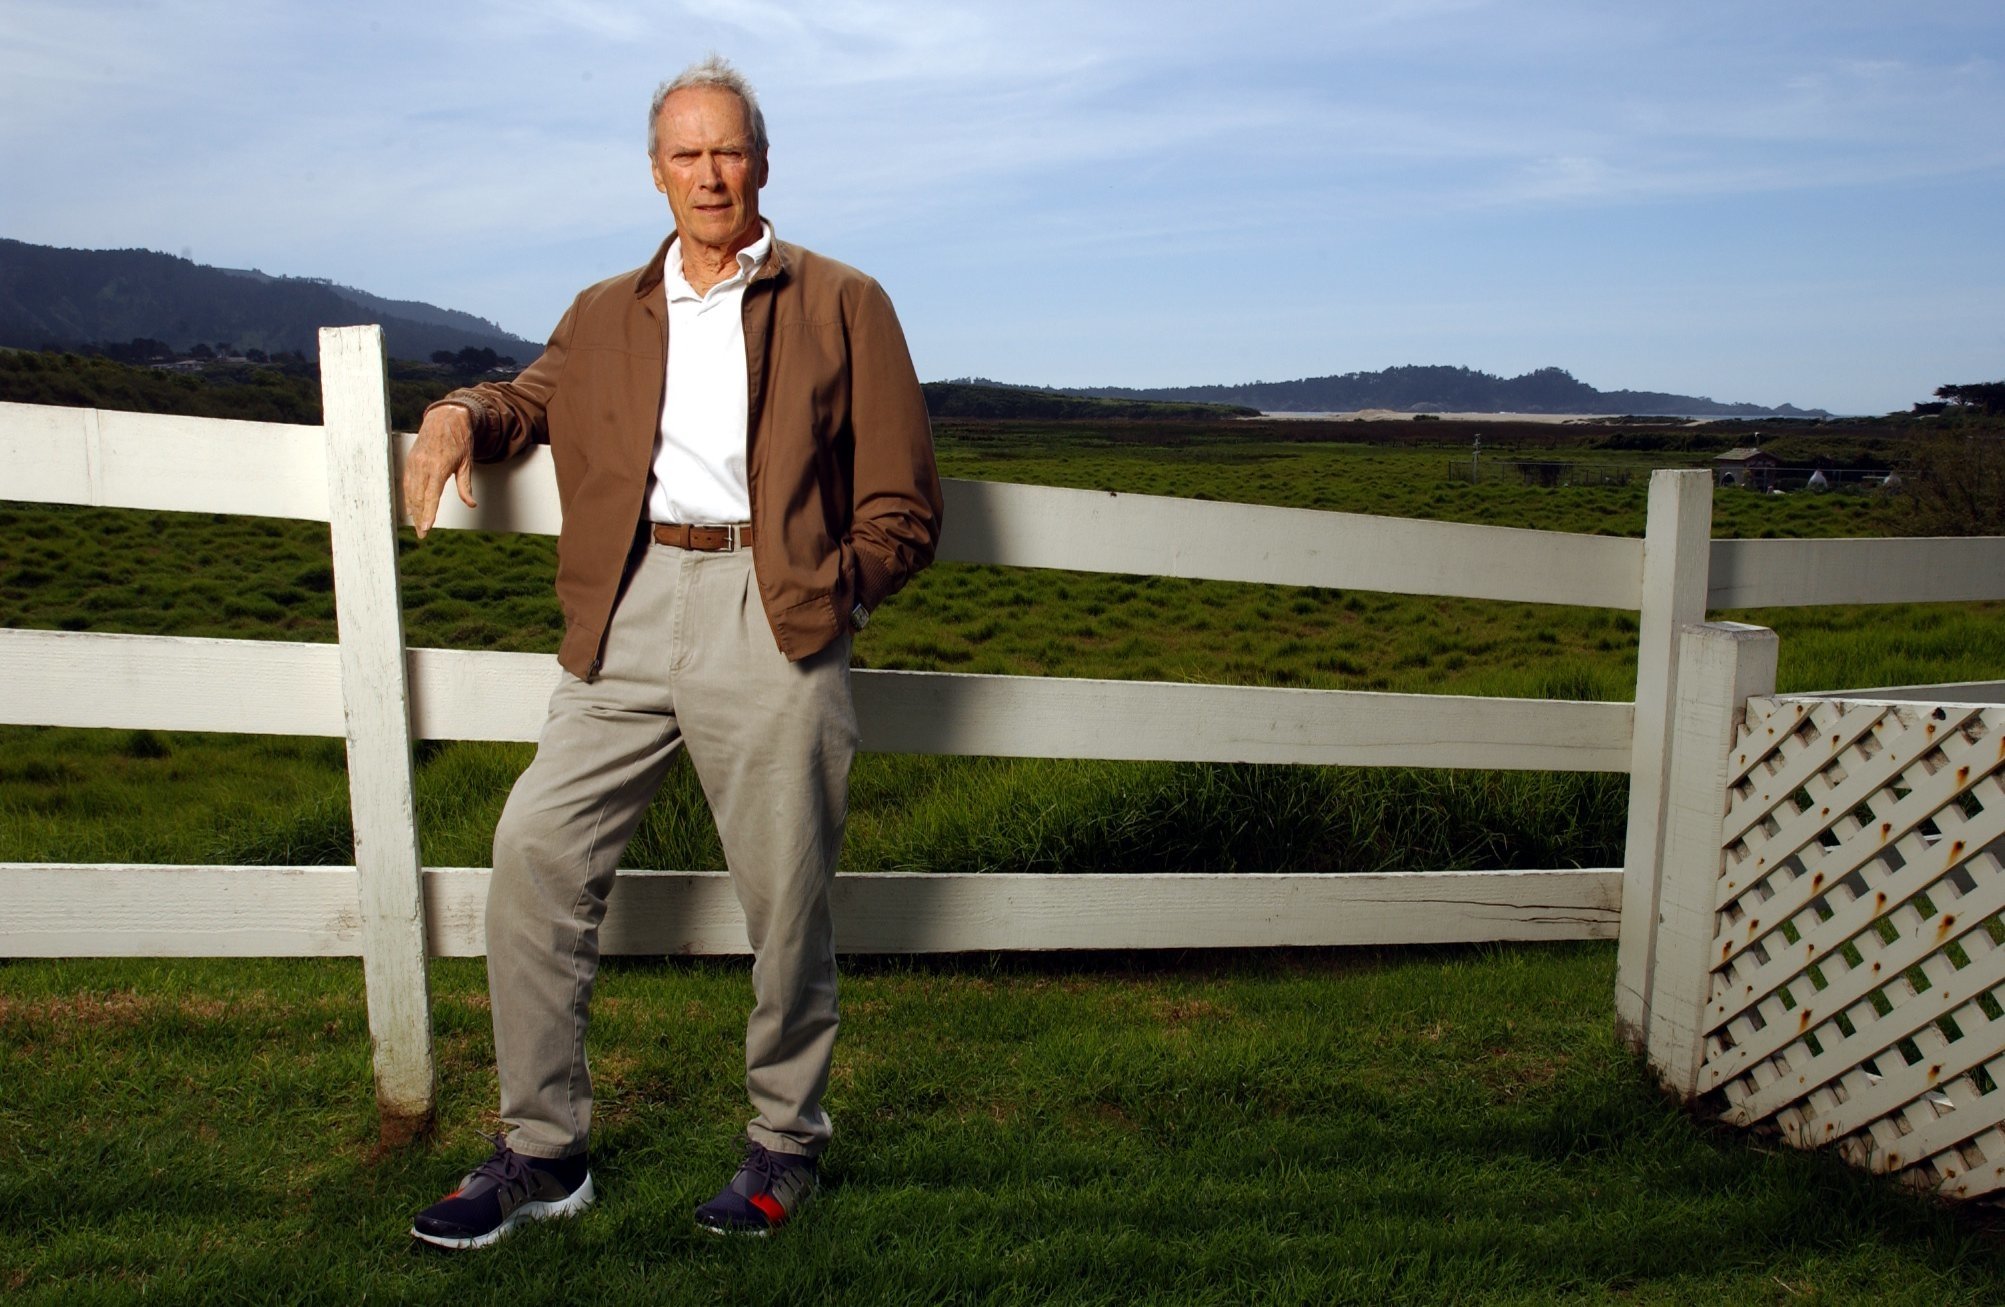 Actor Clint Eastwood at his Mission Ranch Inn in Carmel.| Source: Getty Images